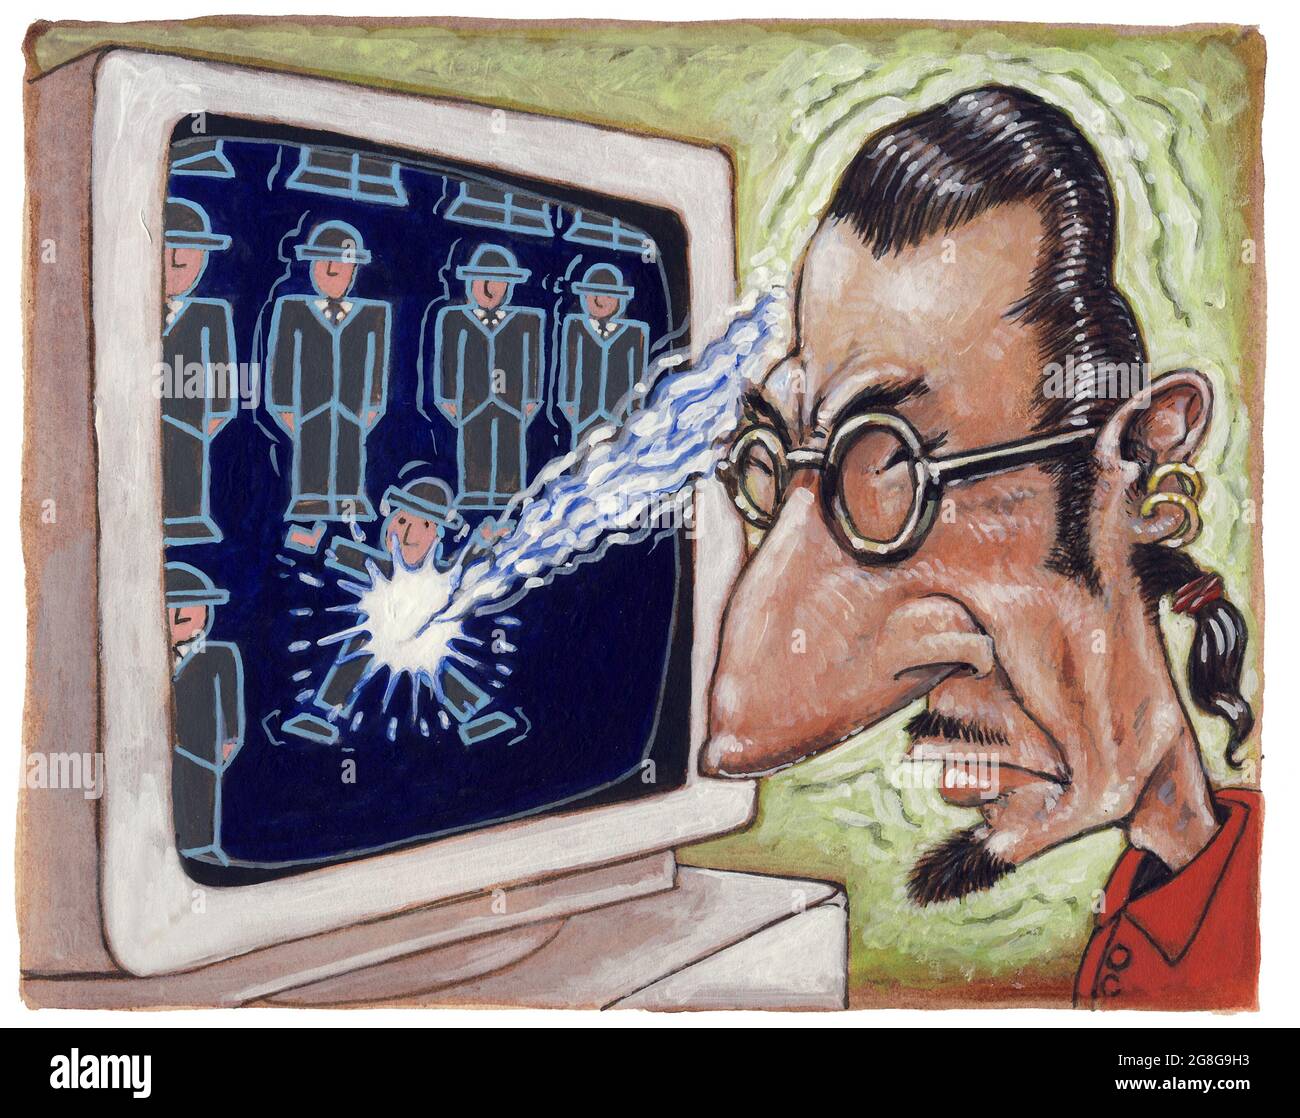 Concept art illustration: man controlling computer game with his mind Brain-computer interface, mind–machine interface, cortical implants, medical aid Stock Photo